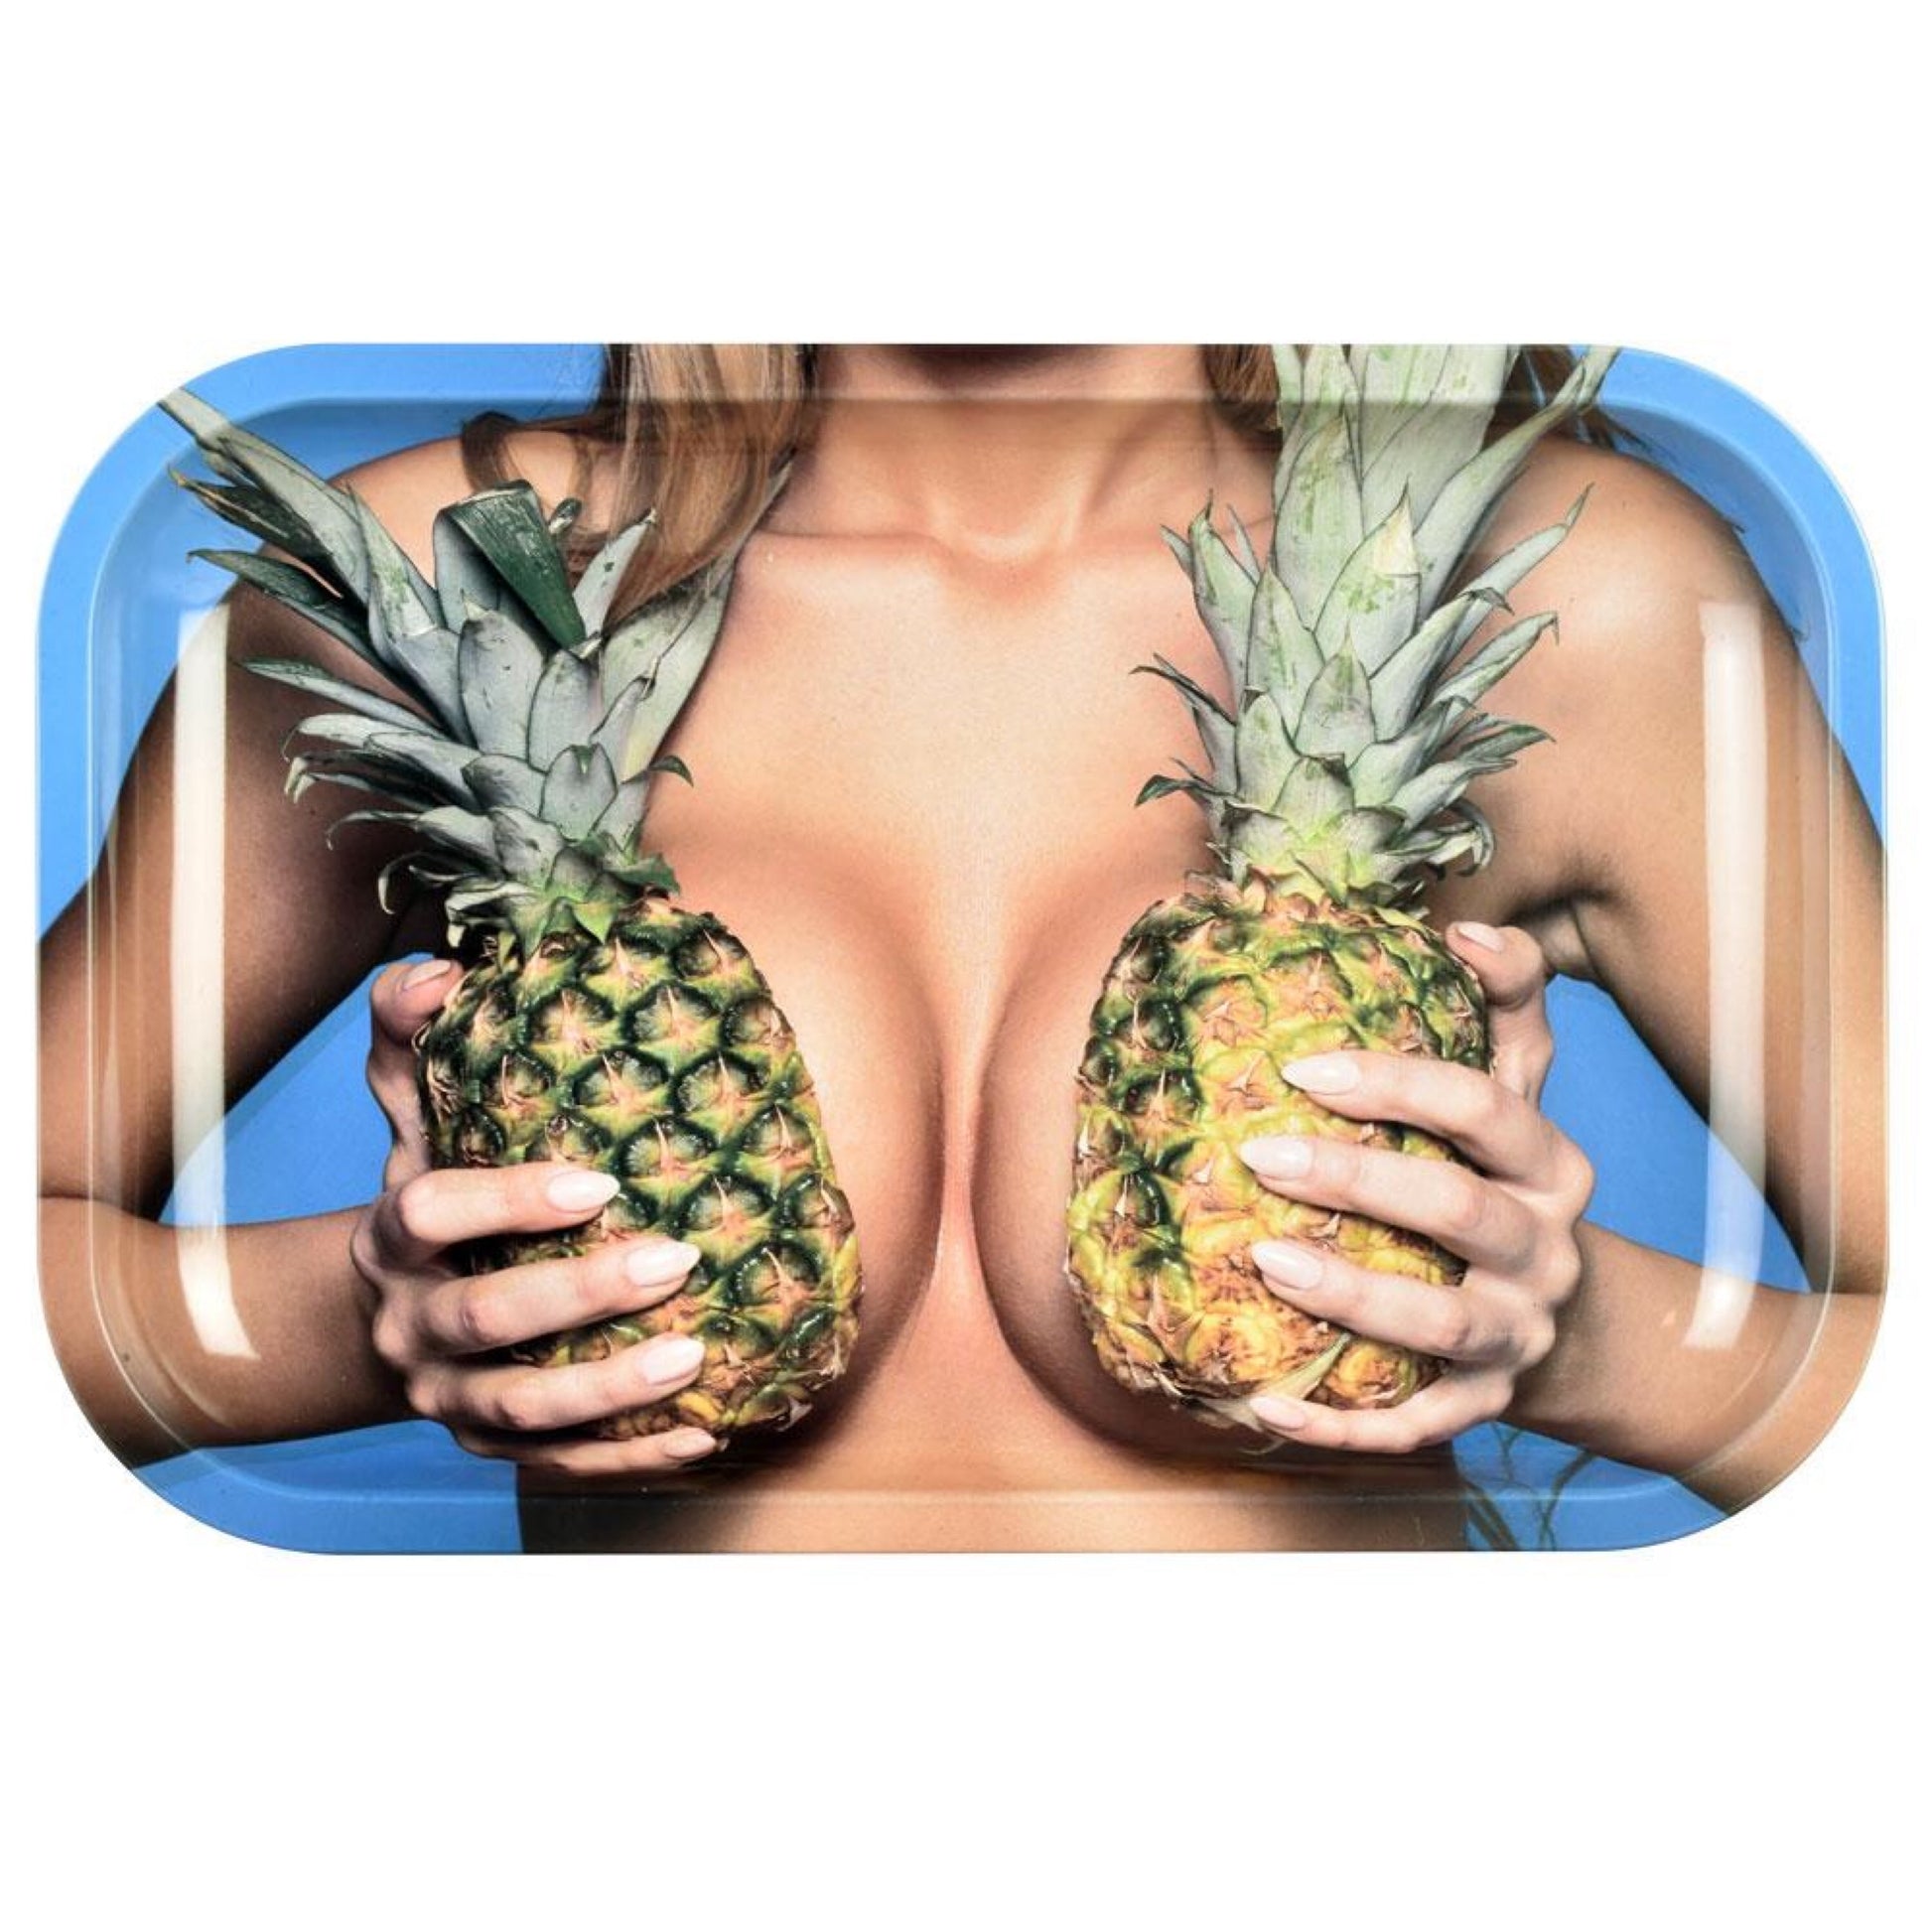 Pulsar “Large Pineapples” Metal Rolling Tray (11” x 7”) by Pulsar | Mission Dispensary